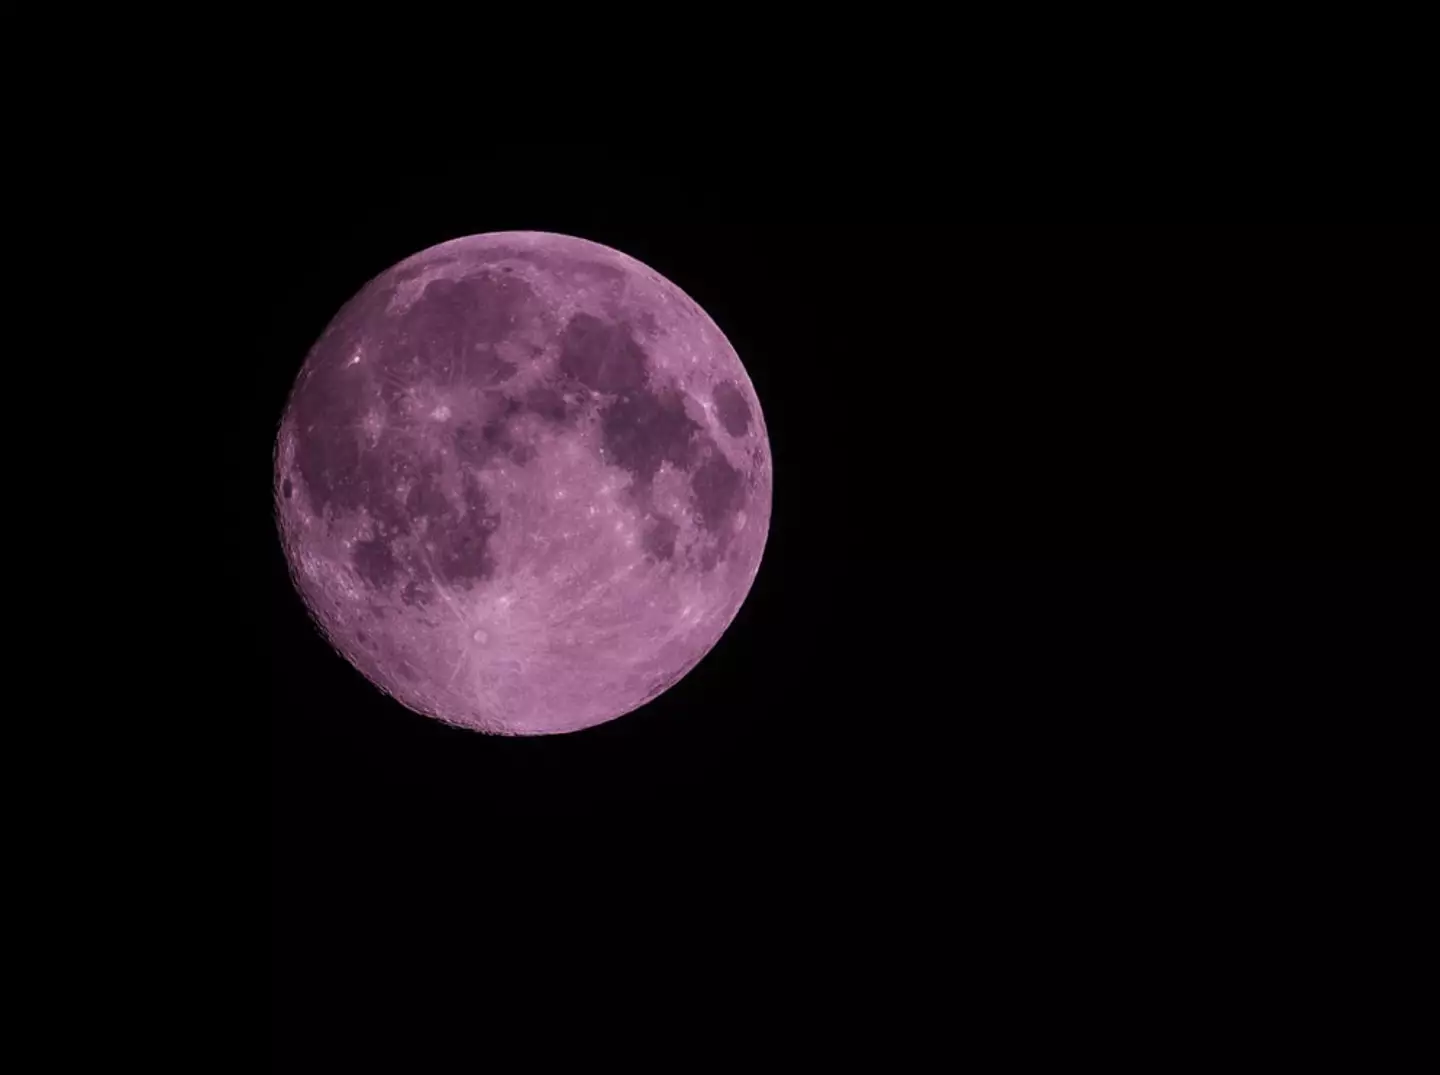 You'll be able to see the pink moon at full illumination very soon.